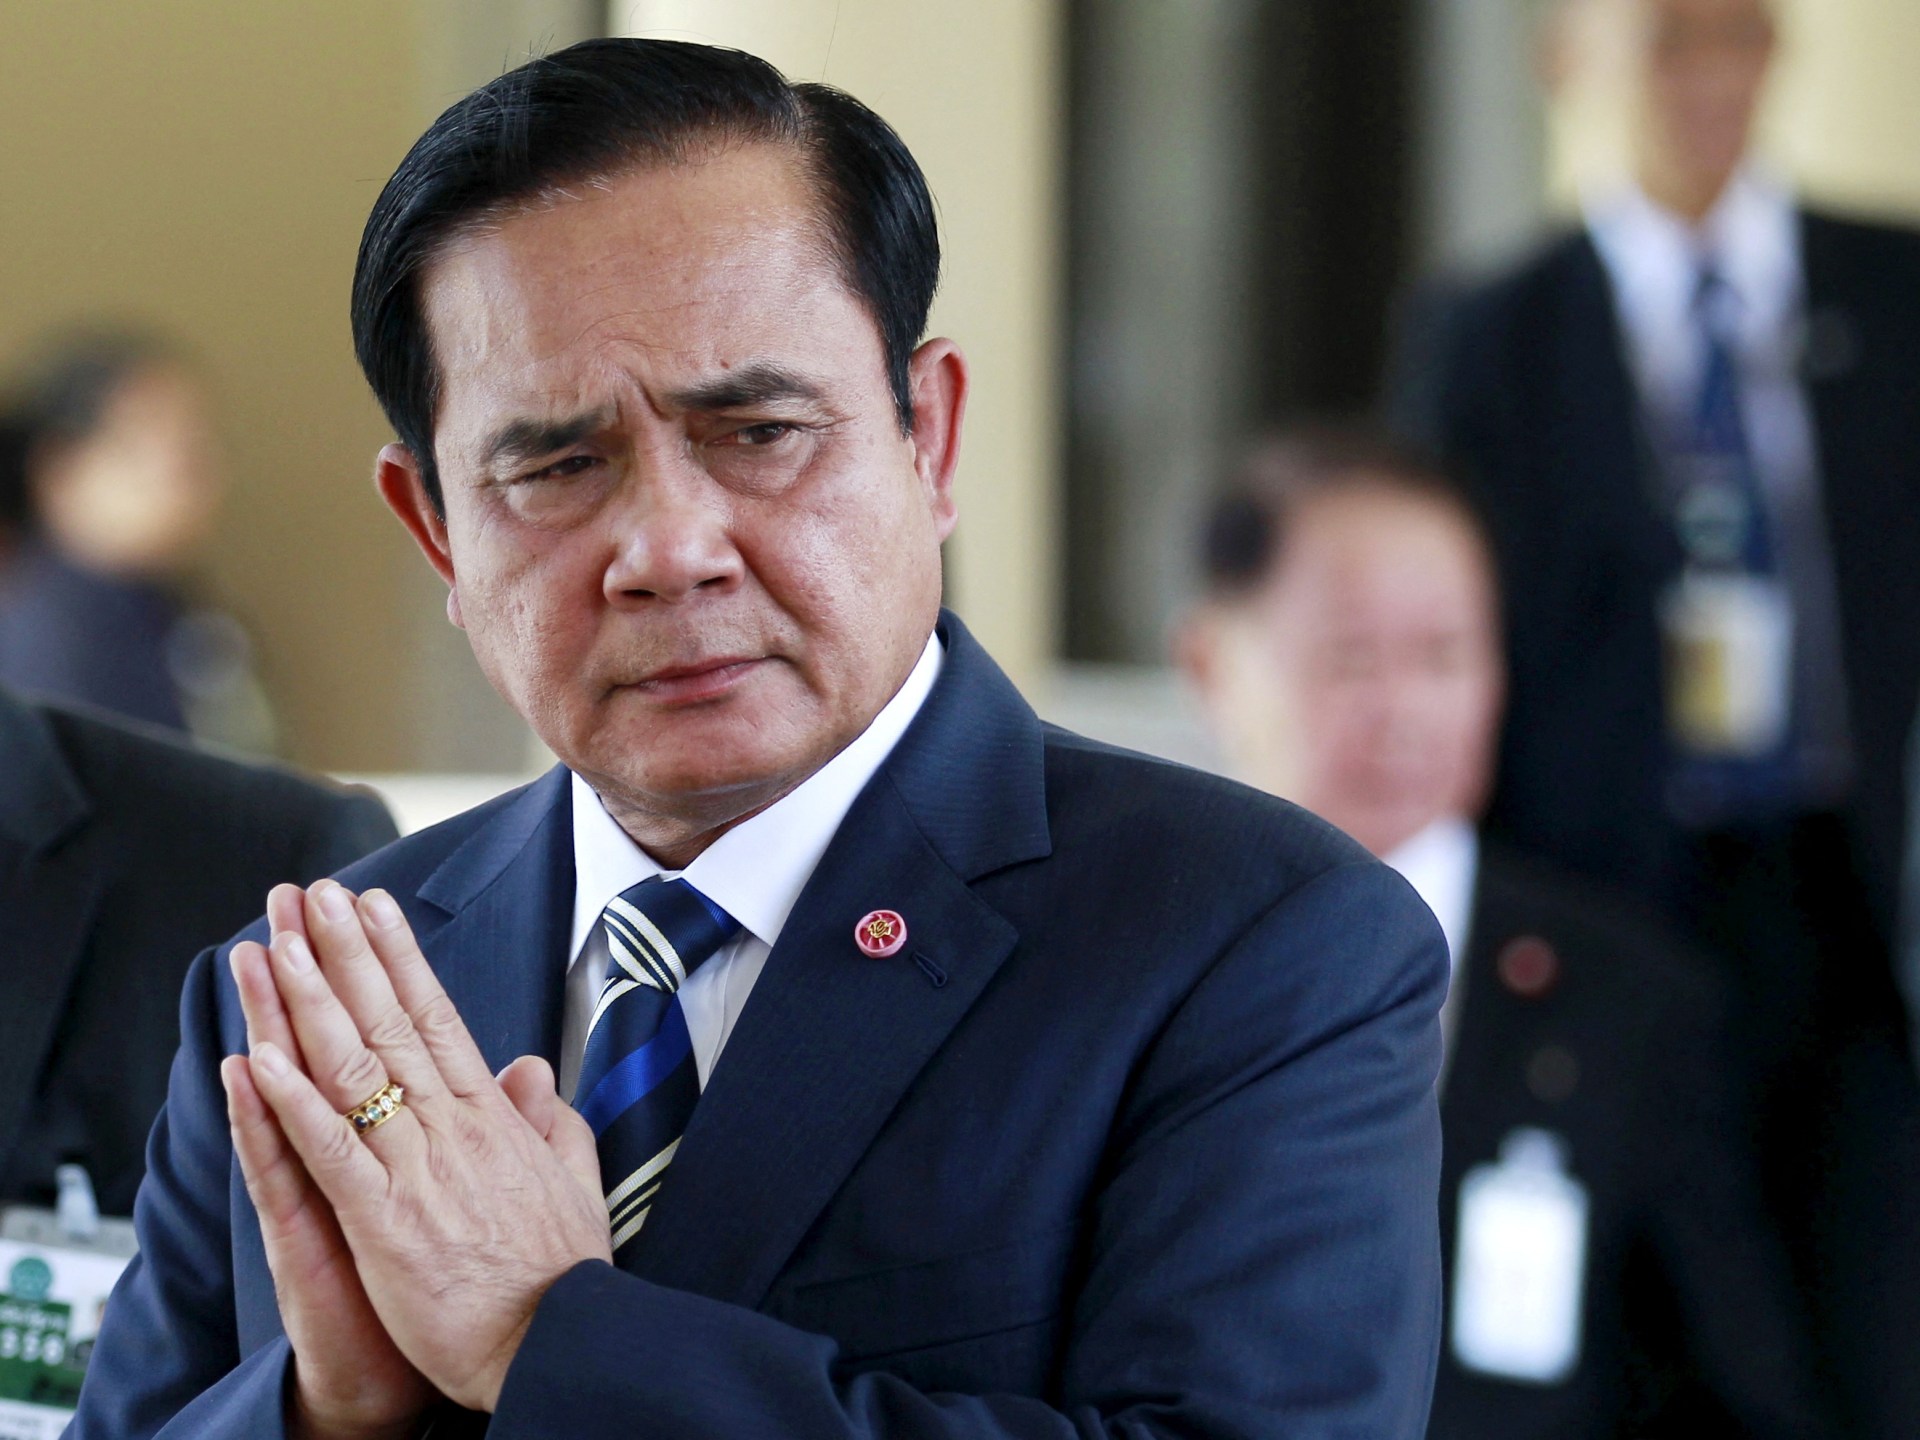 Thai court to rule on Prime Minister Prayuth’s political future